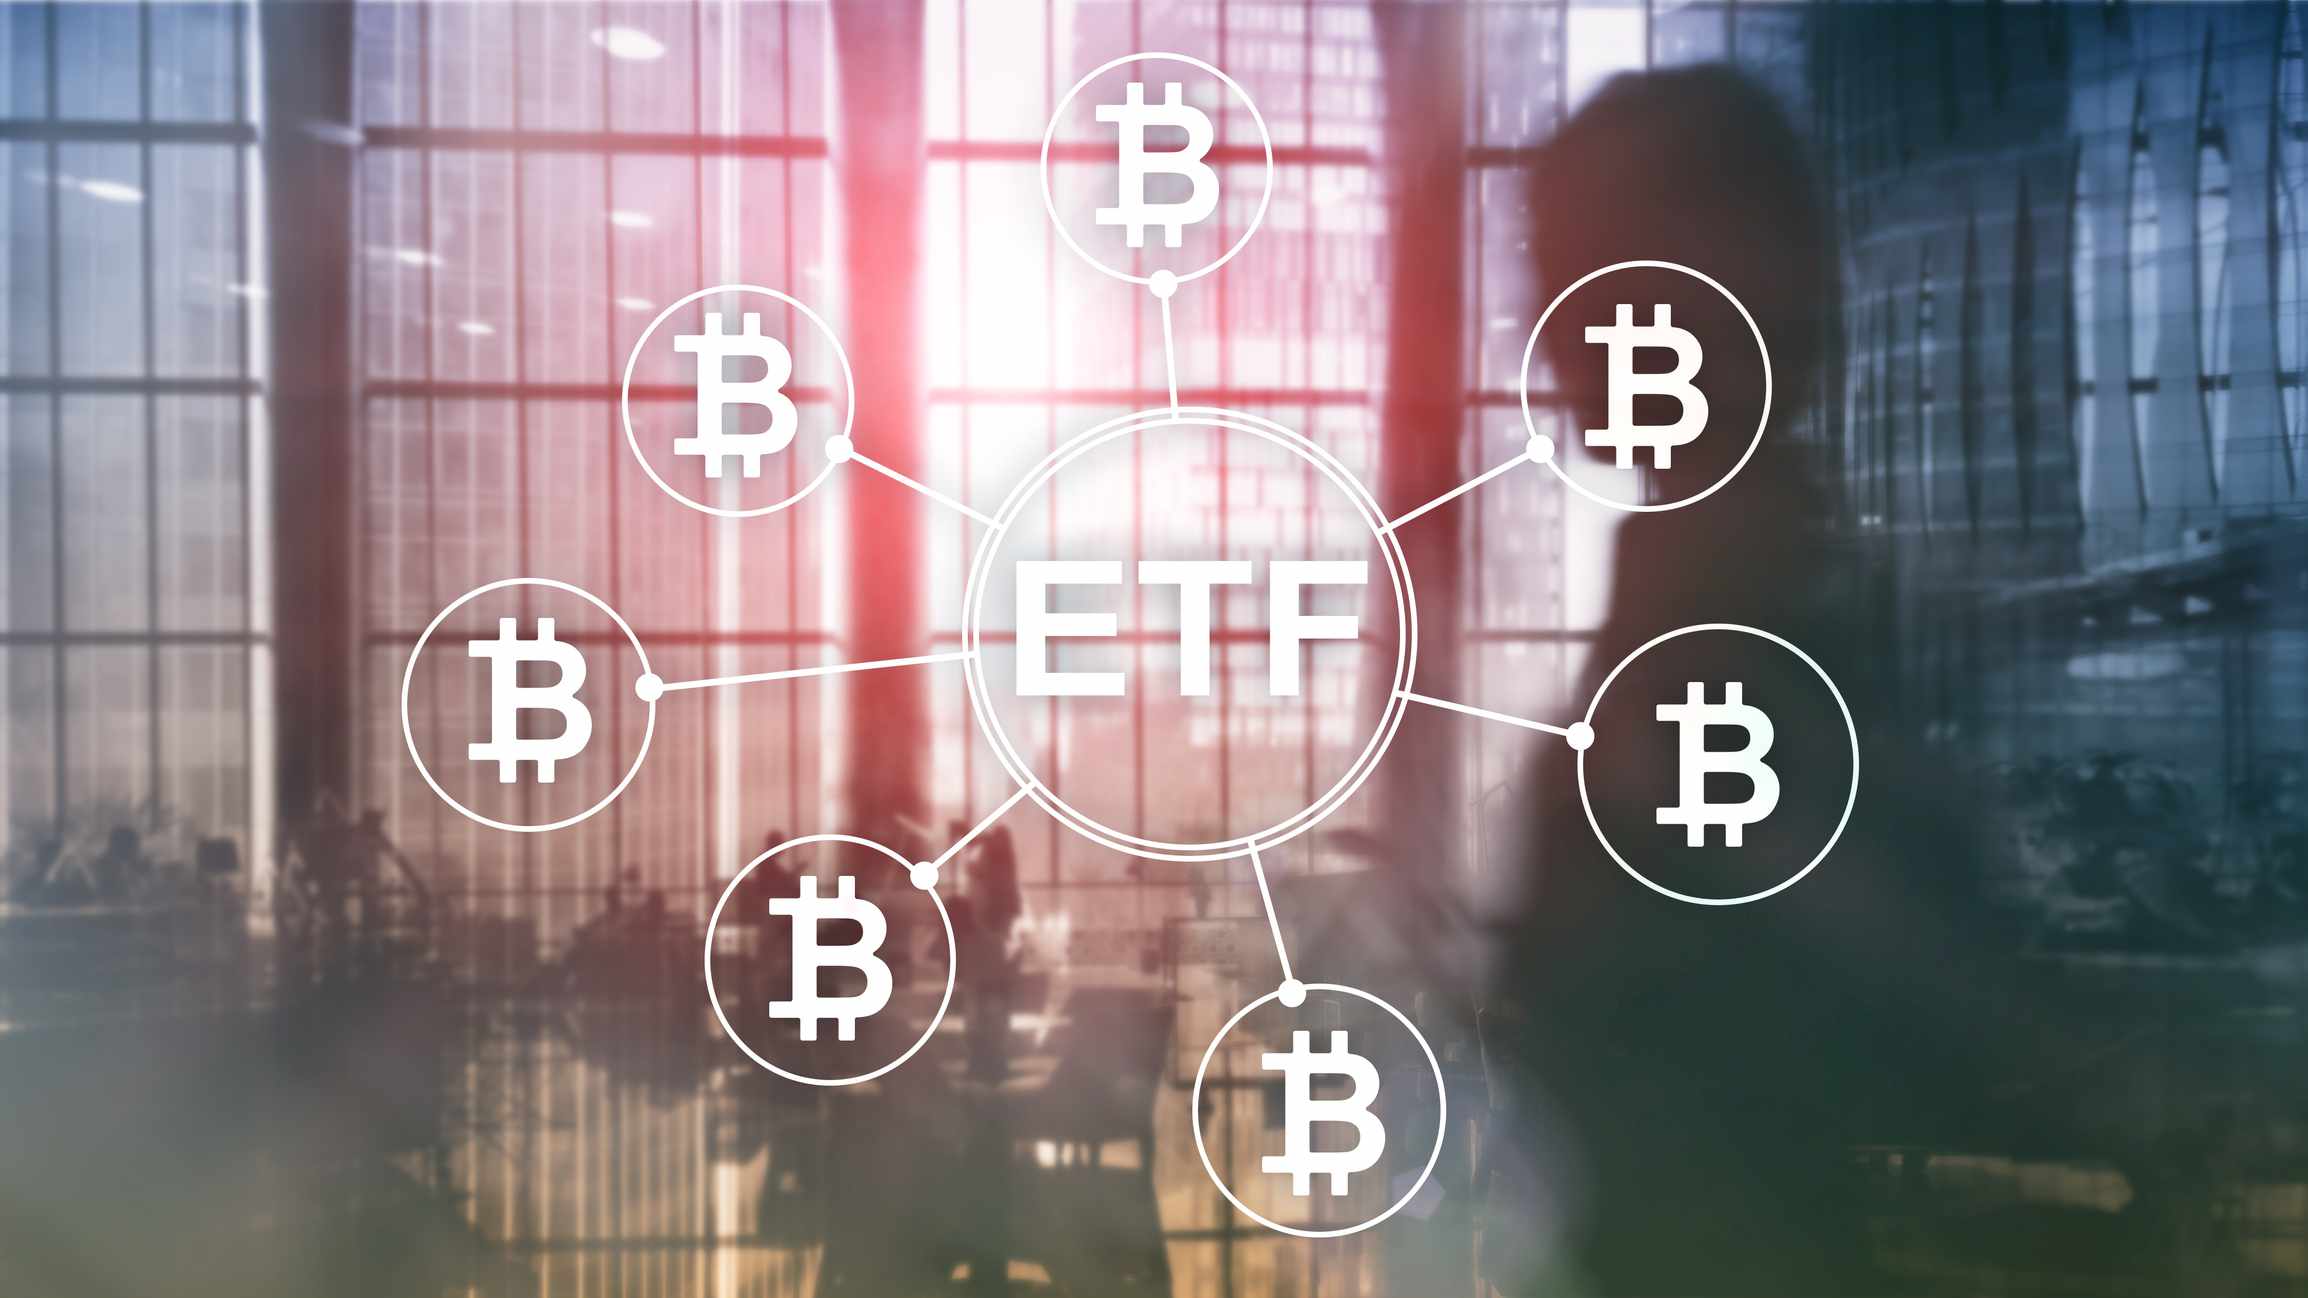 An office overlayed with ETF connected to bitcoin symbols